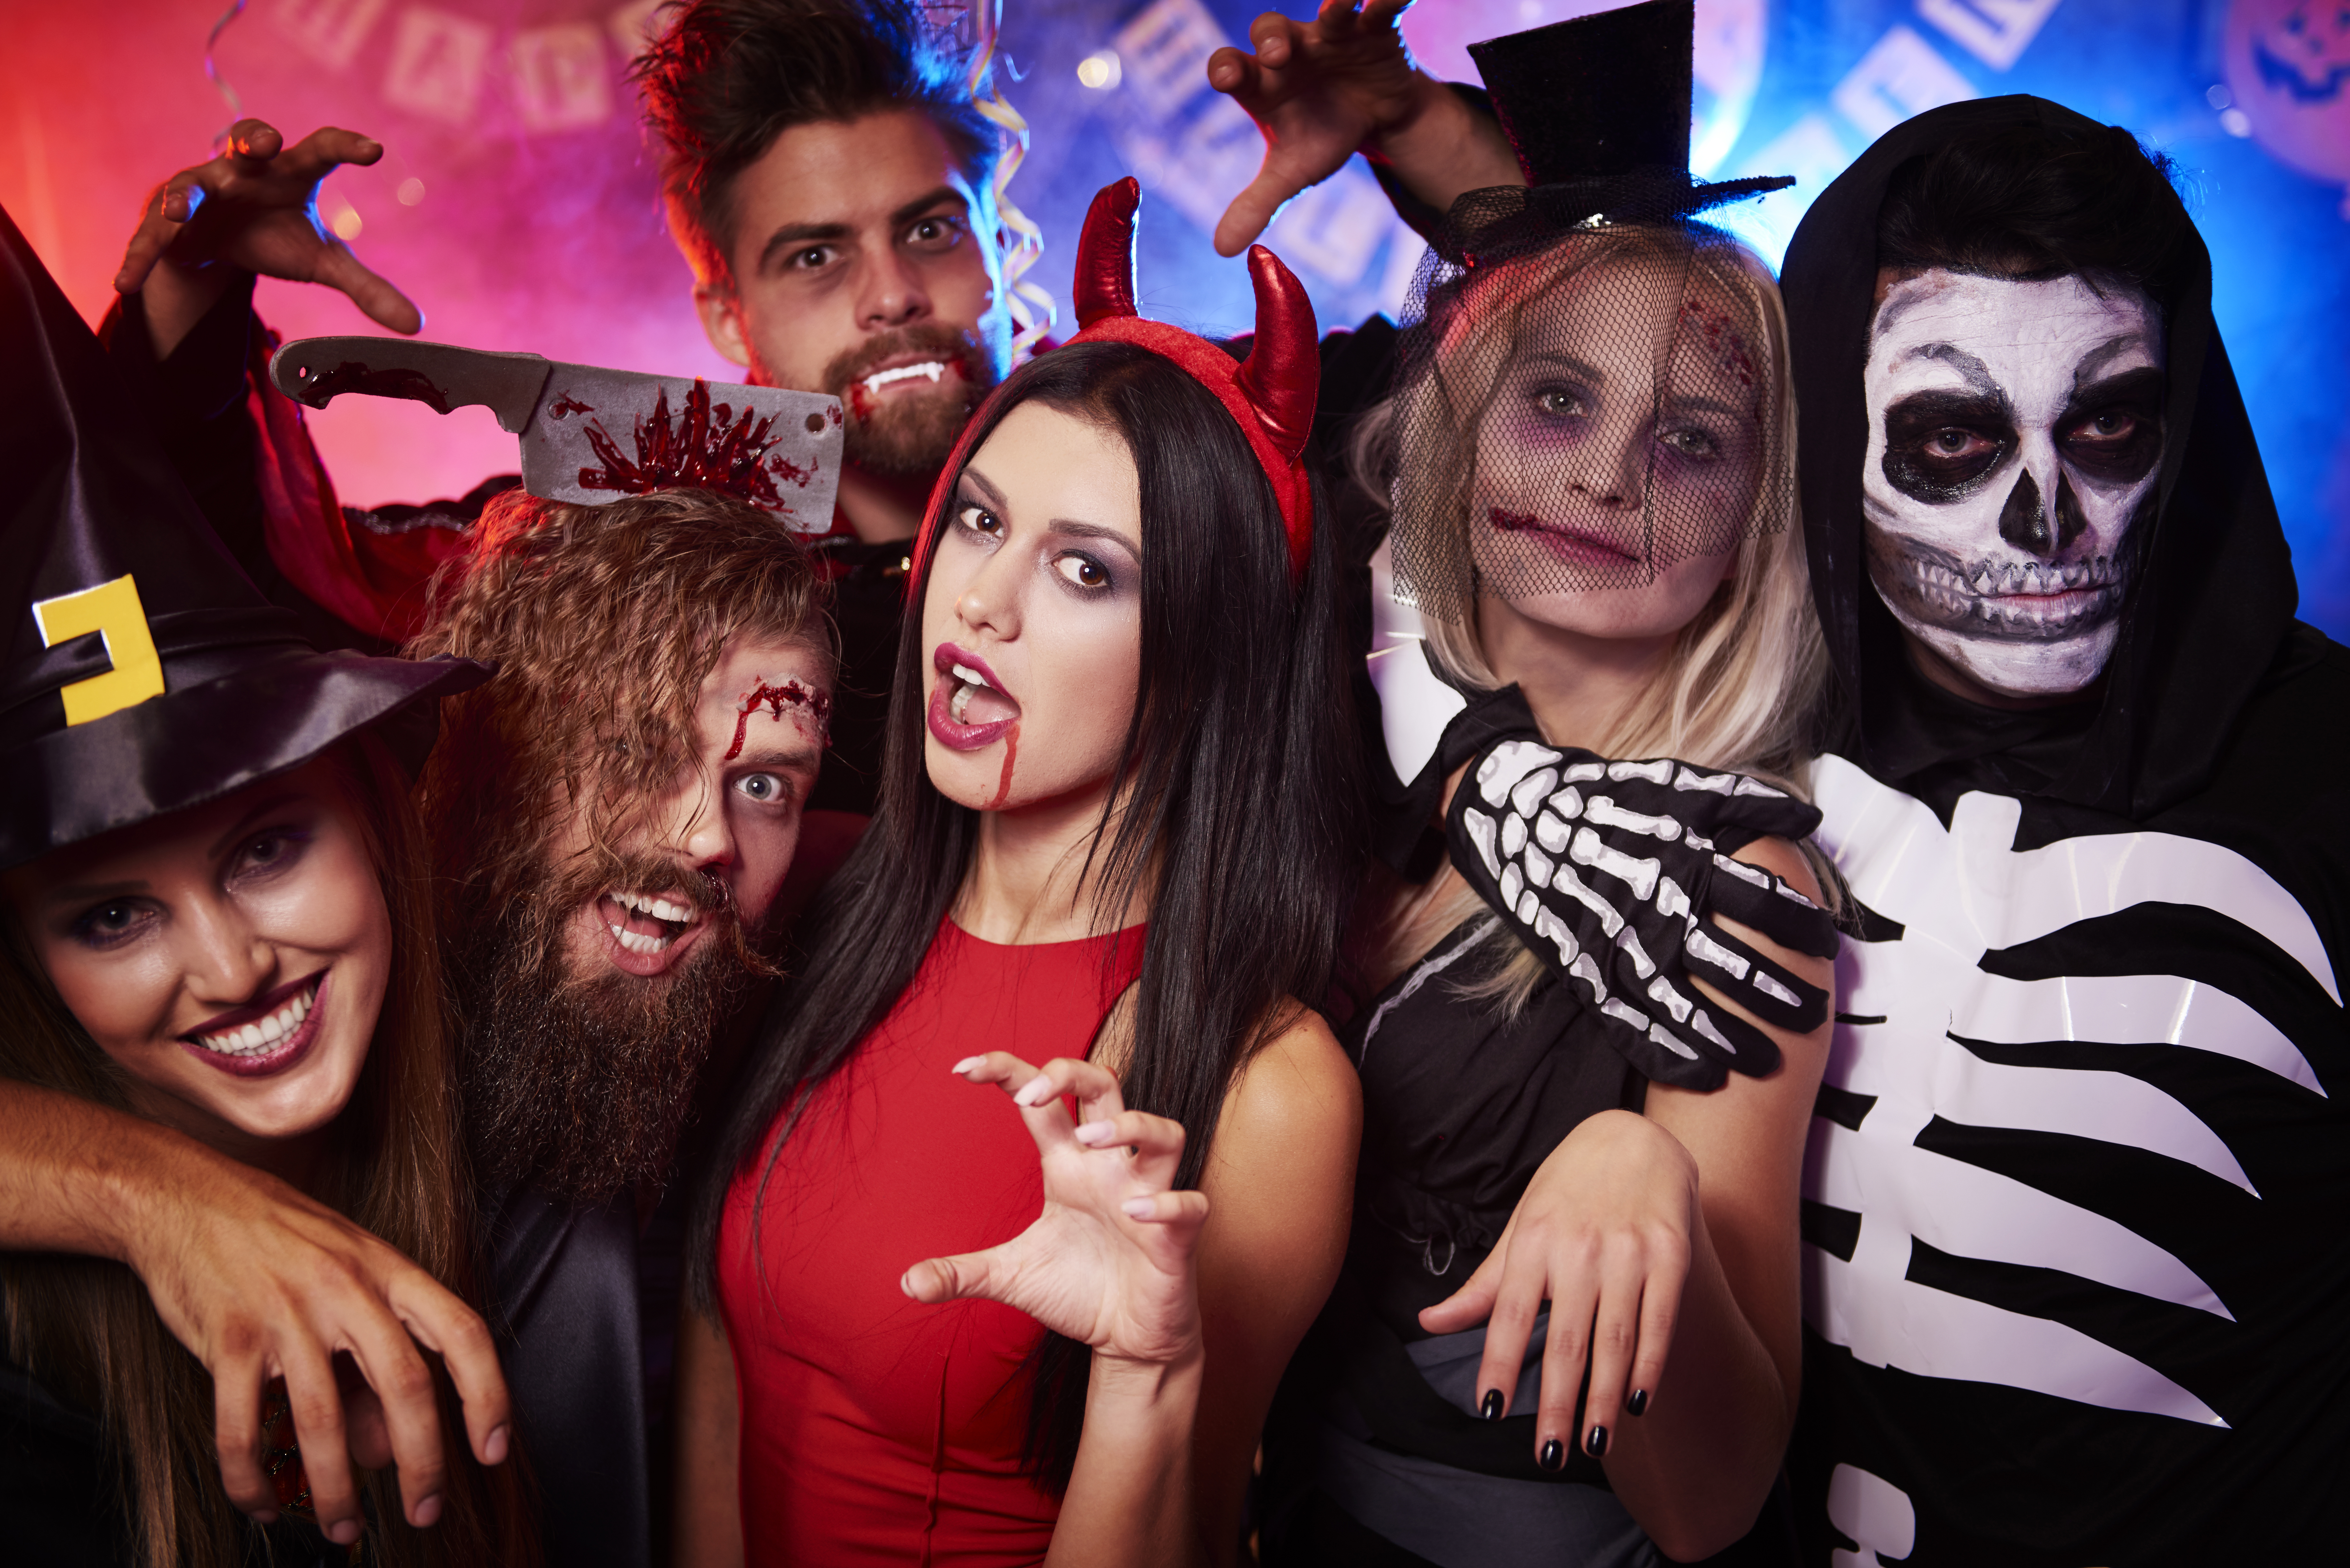 Grab your Halloween costume and party all night long at one of the hottest Halloween...